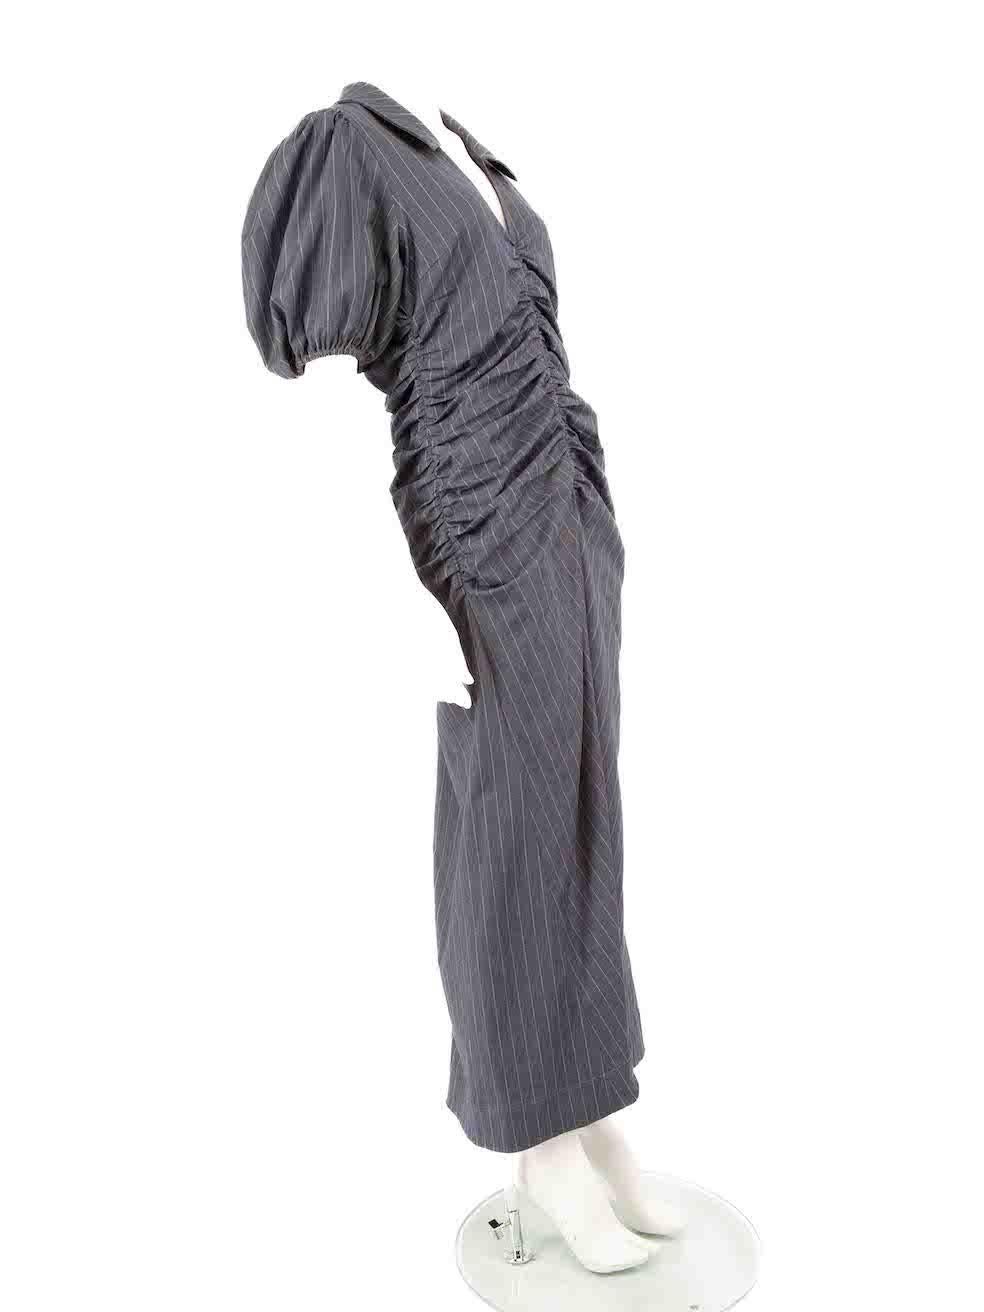 CONDITION is Never worn, with tags. No visible wear to the dress is evident on this new Ganni designer resale item.
 
 
 
 Details
 
 
 Grey
 
 Polyester
 
 Midi dress
 
 Pinstriped pattern
 
 V neckline
 
 Puff sleeves
 
 Ruched accent
 
 Stretchy
